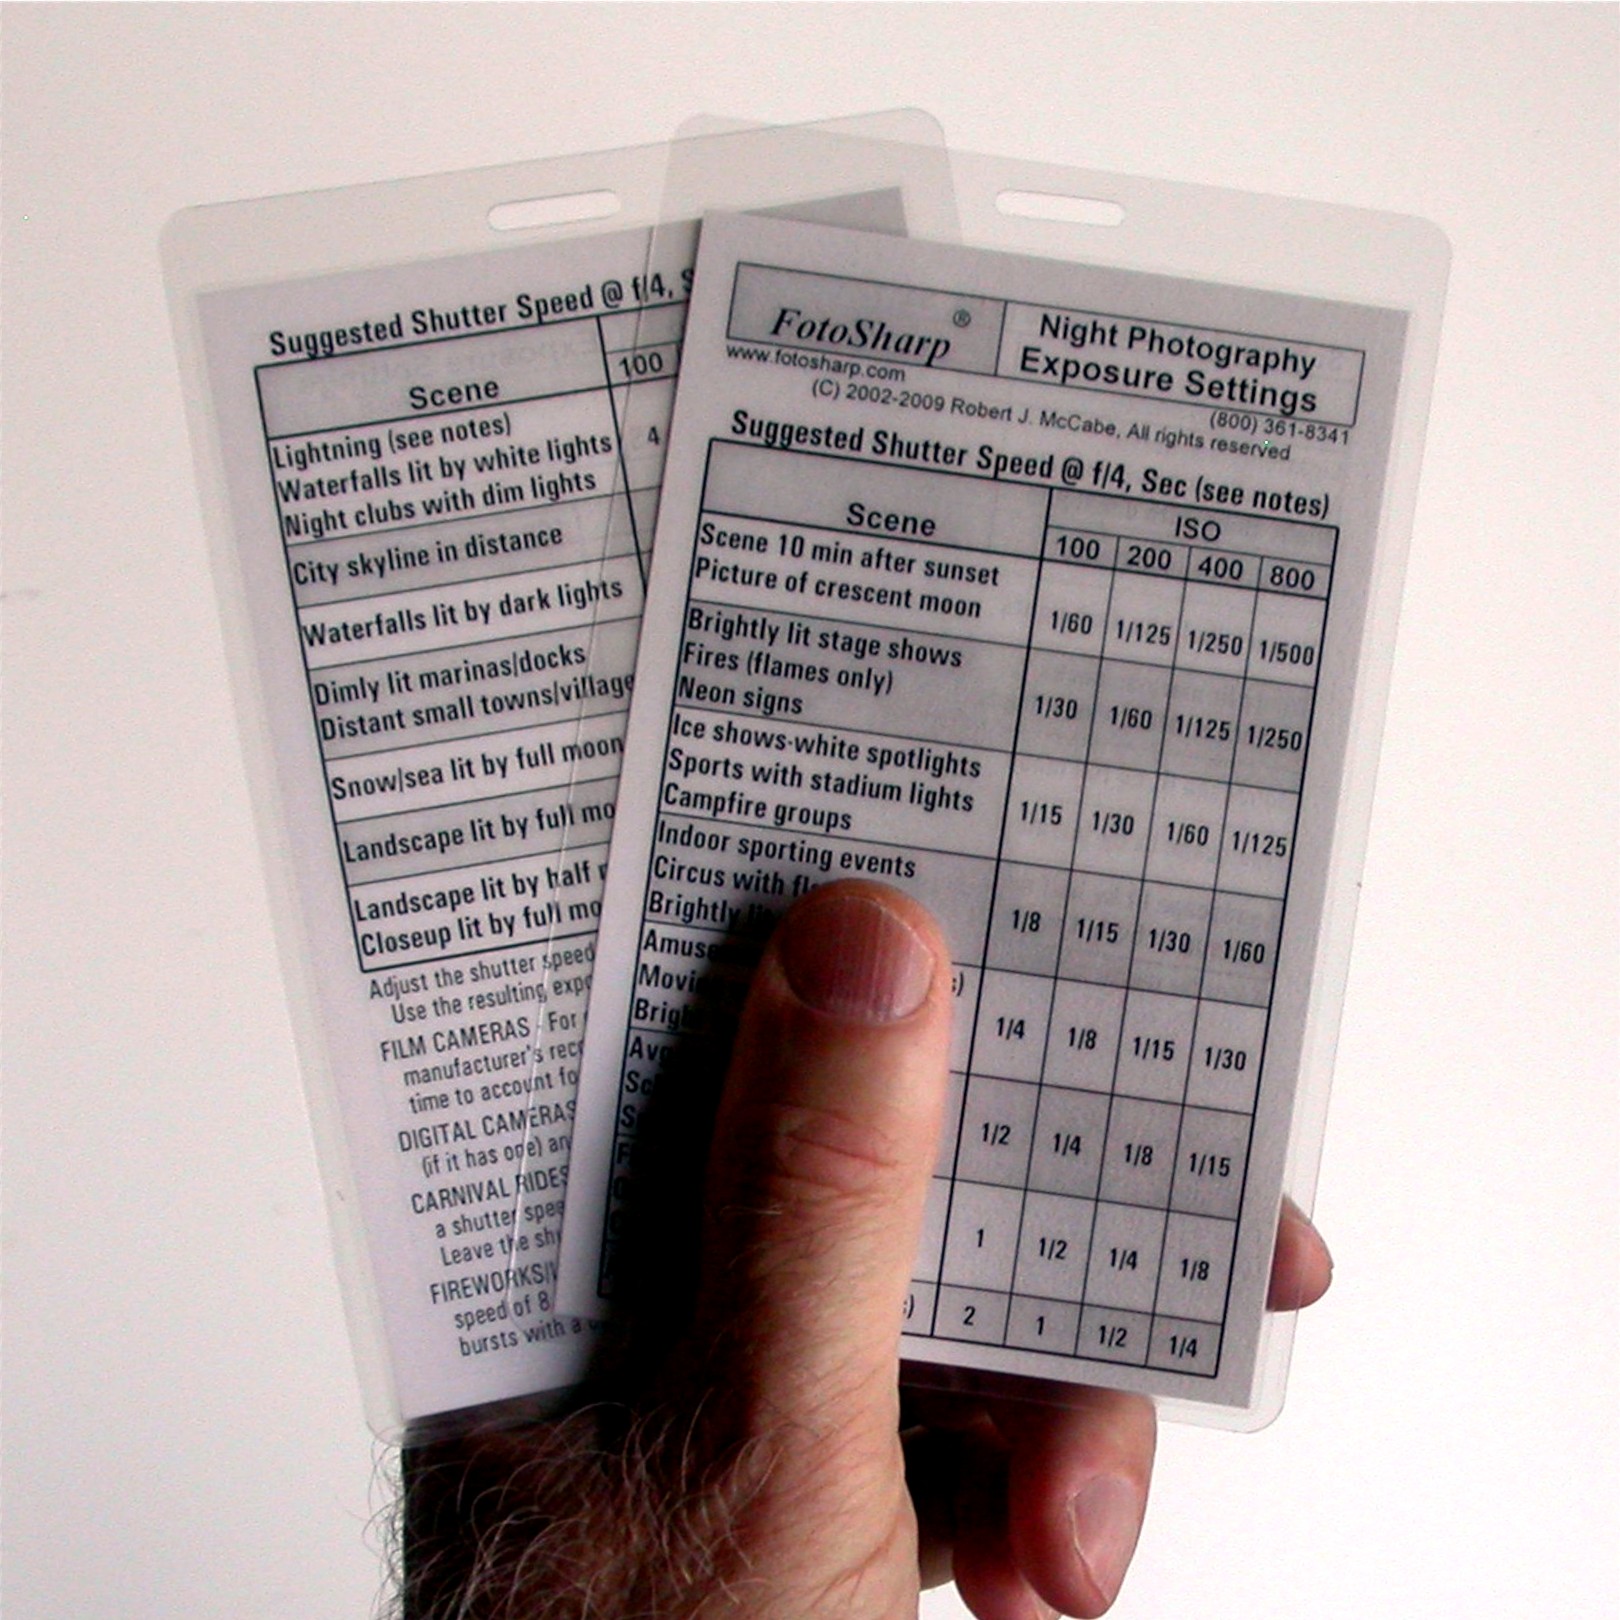 This is a low resolution image.
Our cards are printed on a
laser printer and are VERY
clear and easy to read.